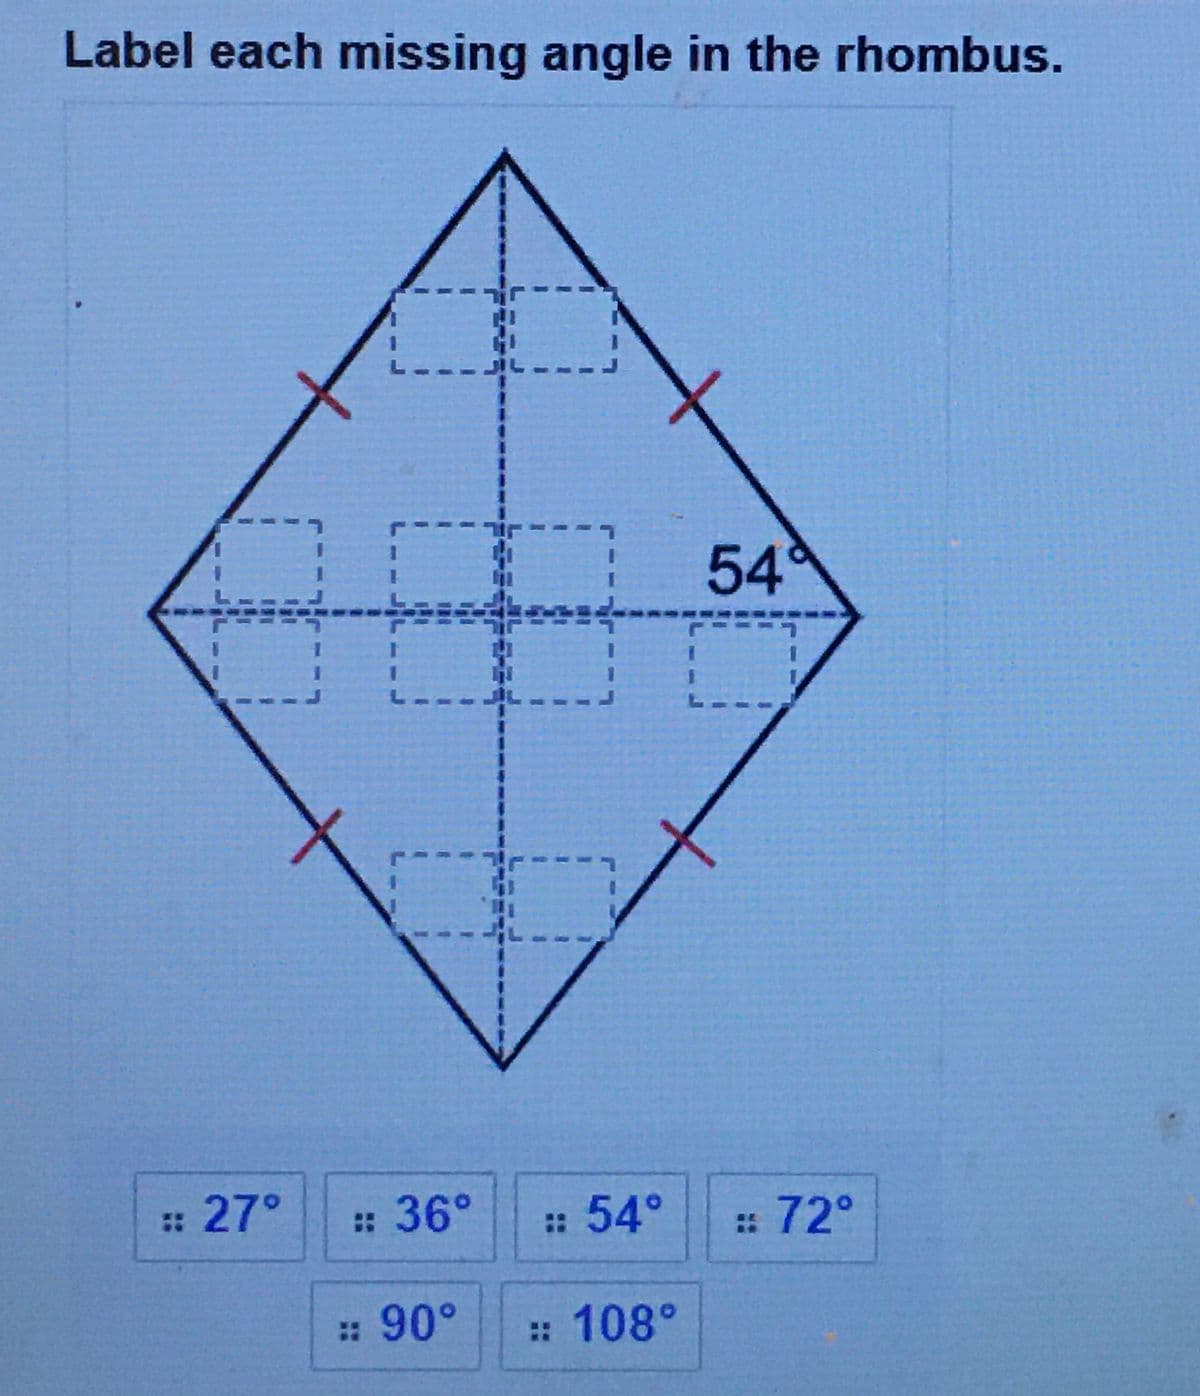 Label each missing angle in the rhombus.
54
1.
:: 27°
: 36°
: 54°
::
: 72°
: 90°
:: 108°
